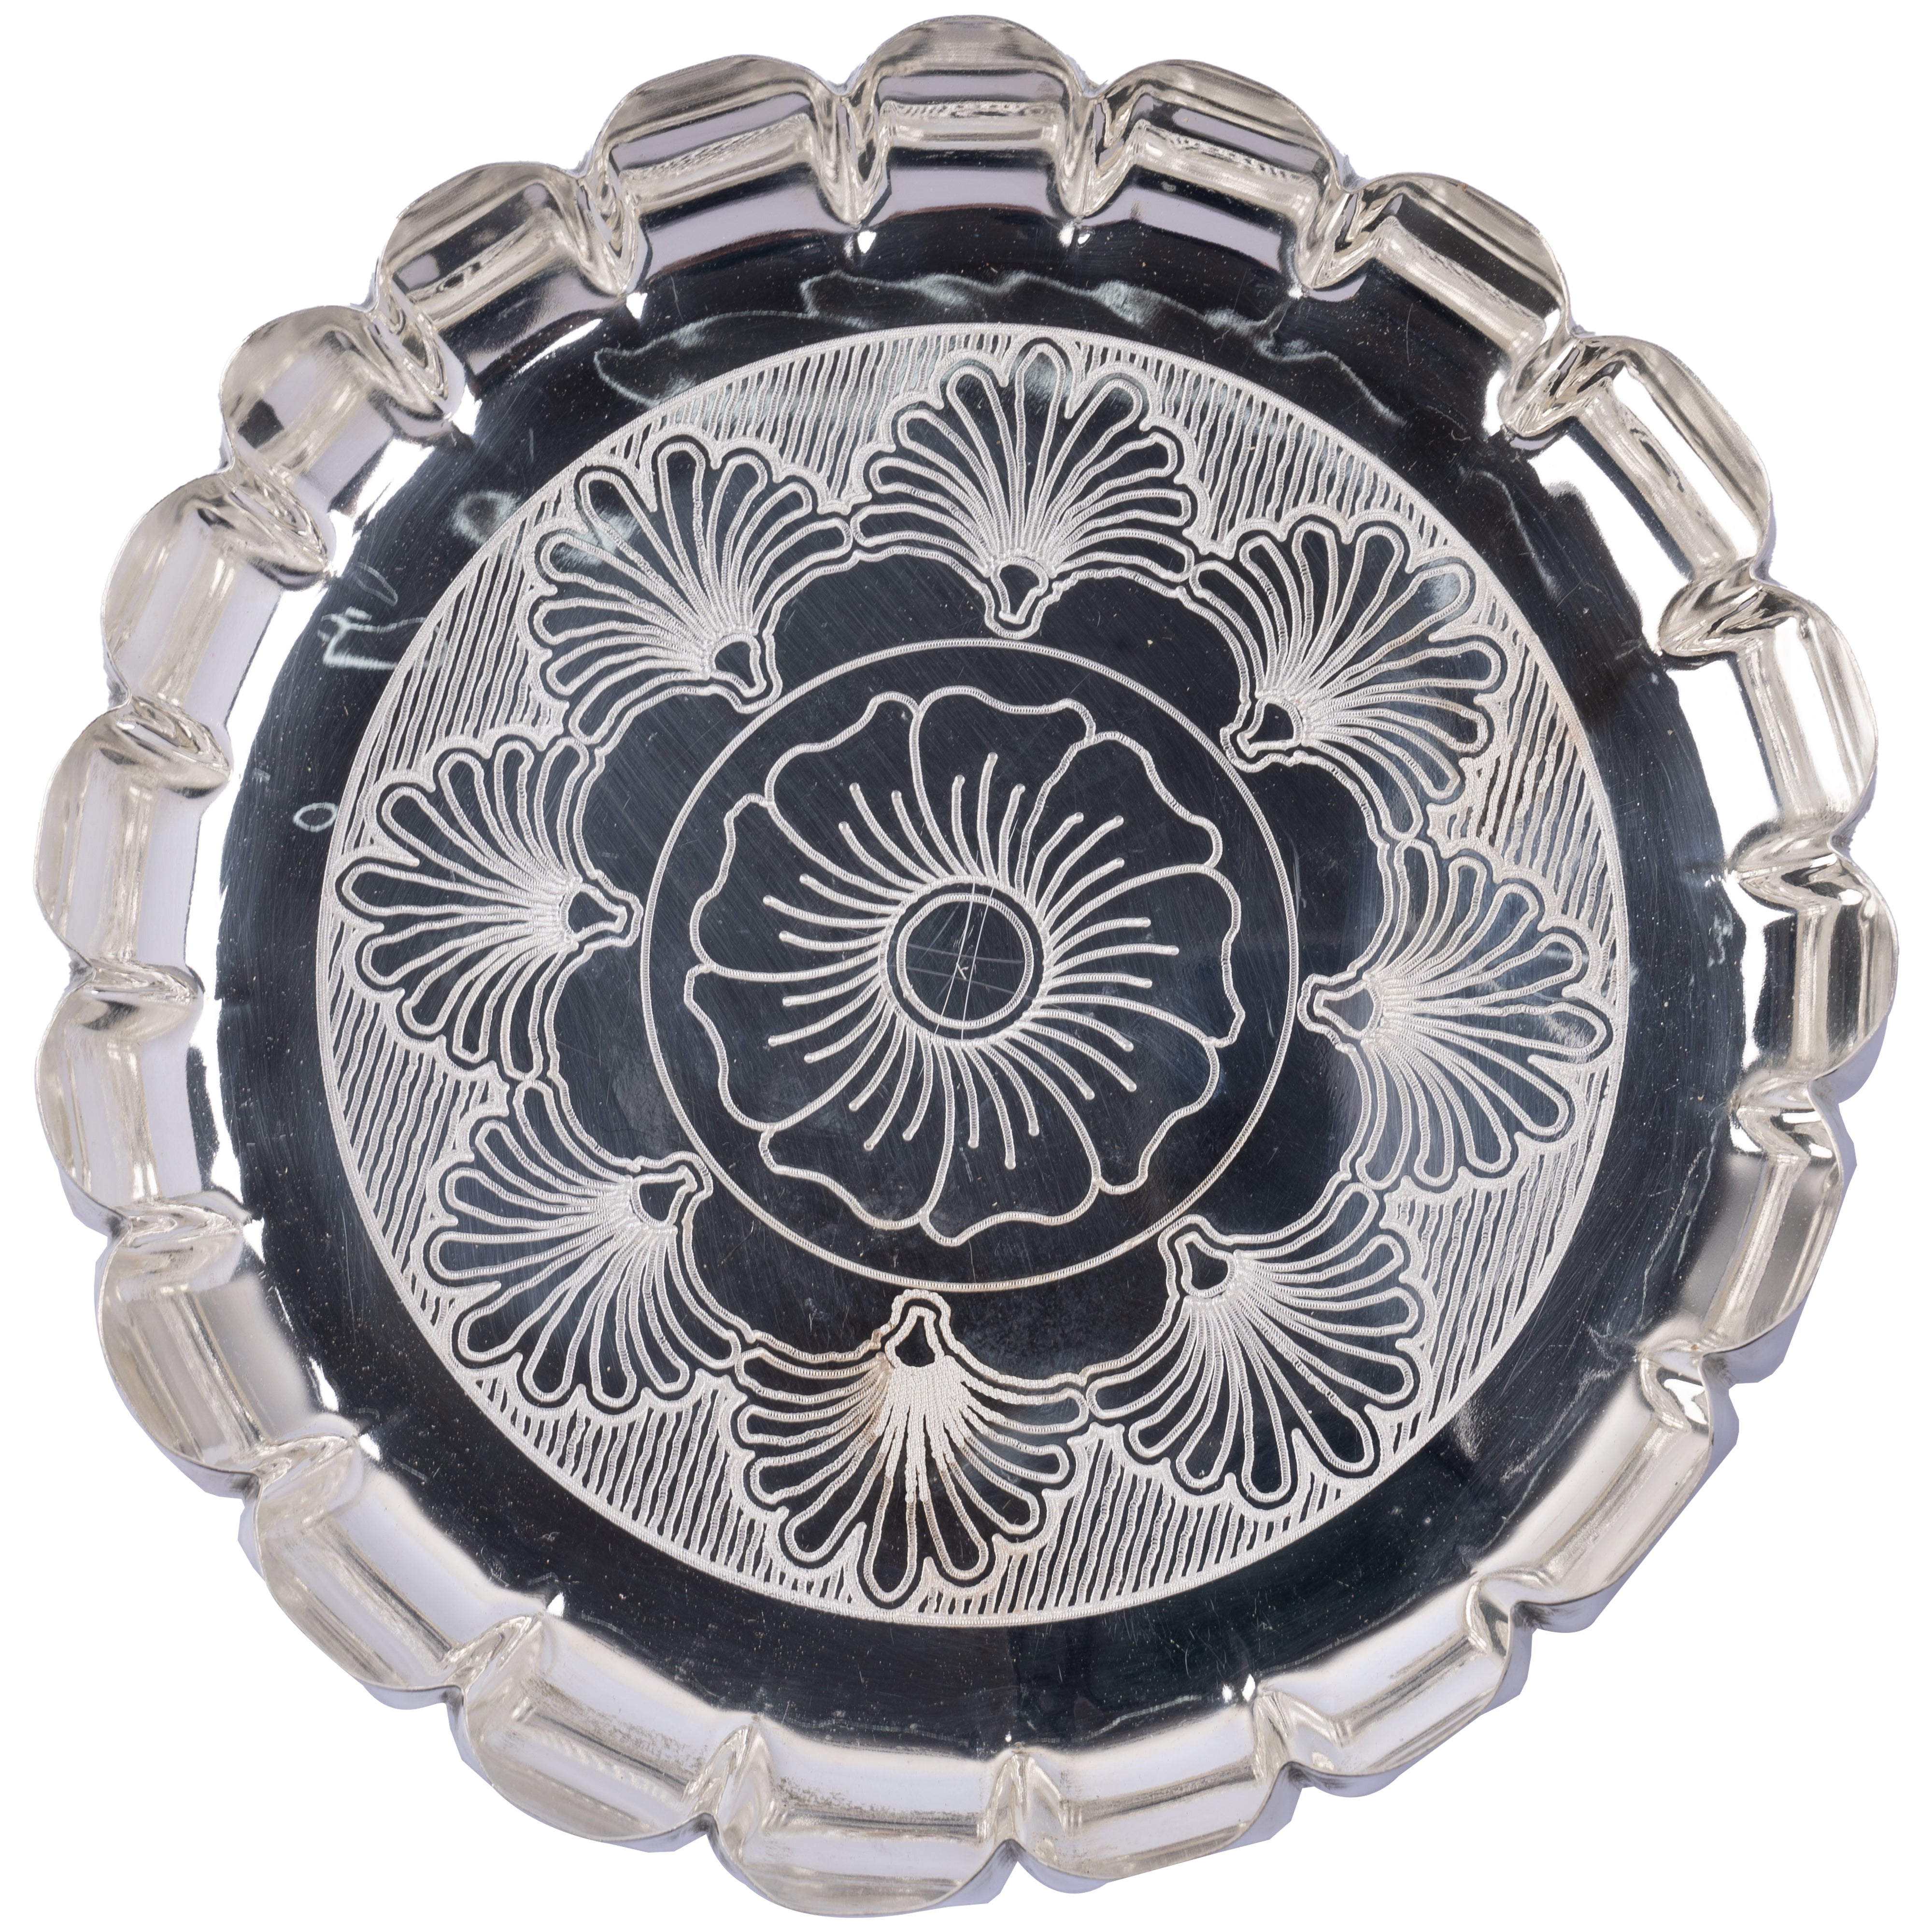 Sigaram 7.5 Inch German Silver Floral Designed Plate with Lay For Home Pooja Decor K4404